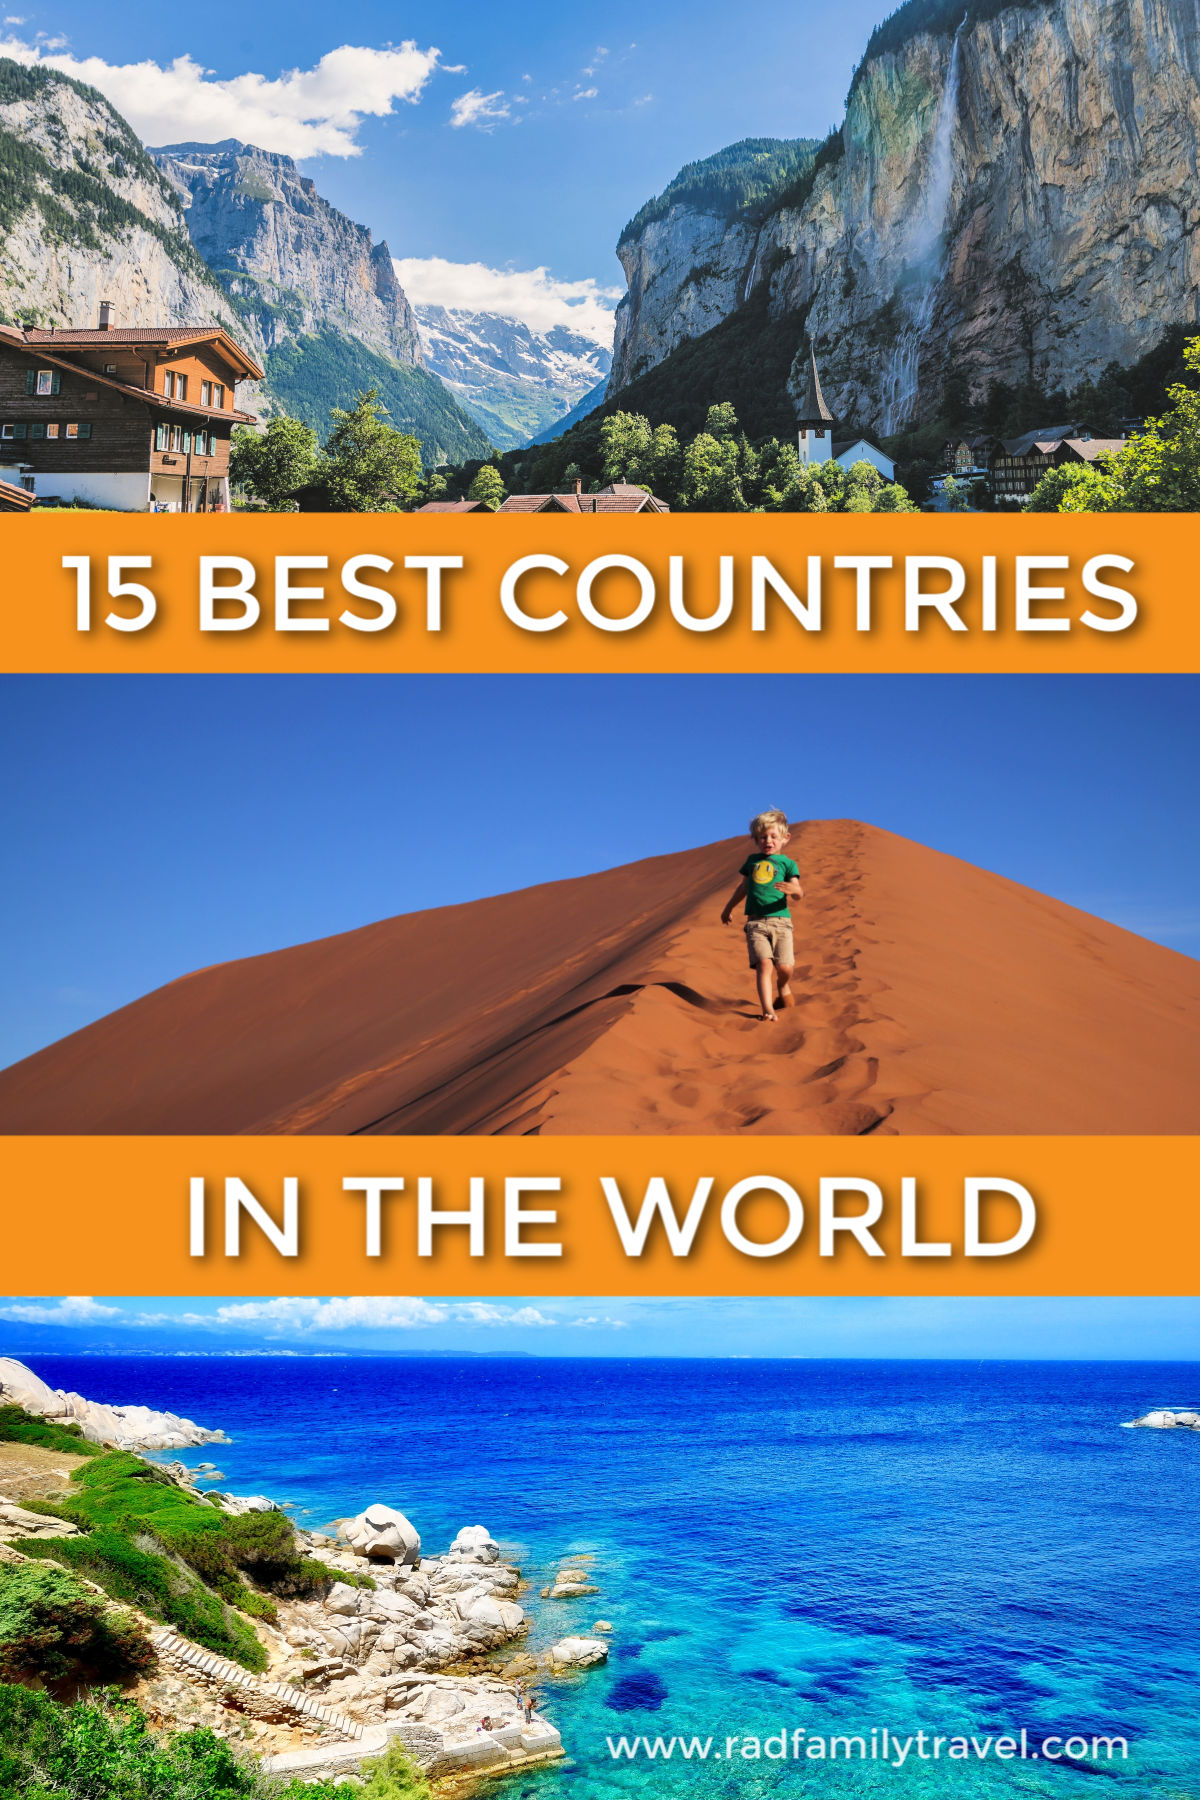 15 best countries in the world